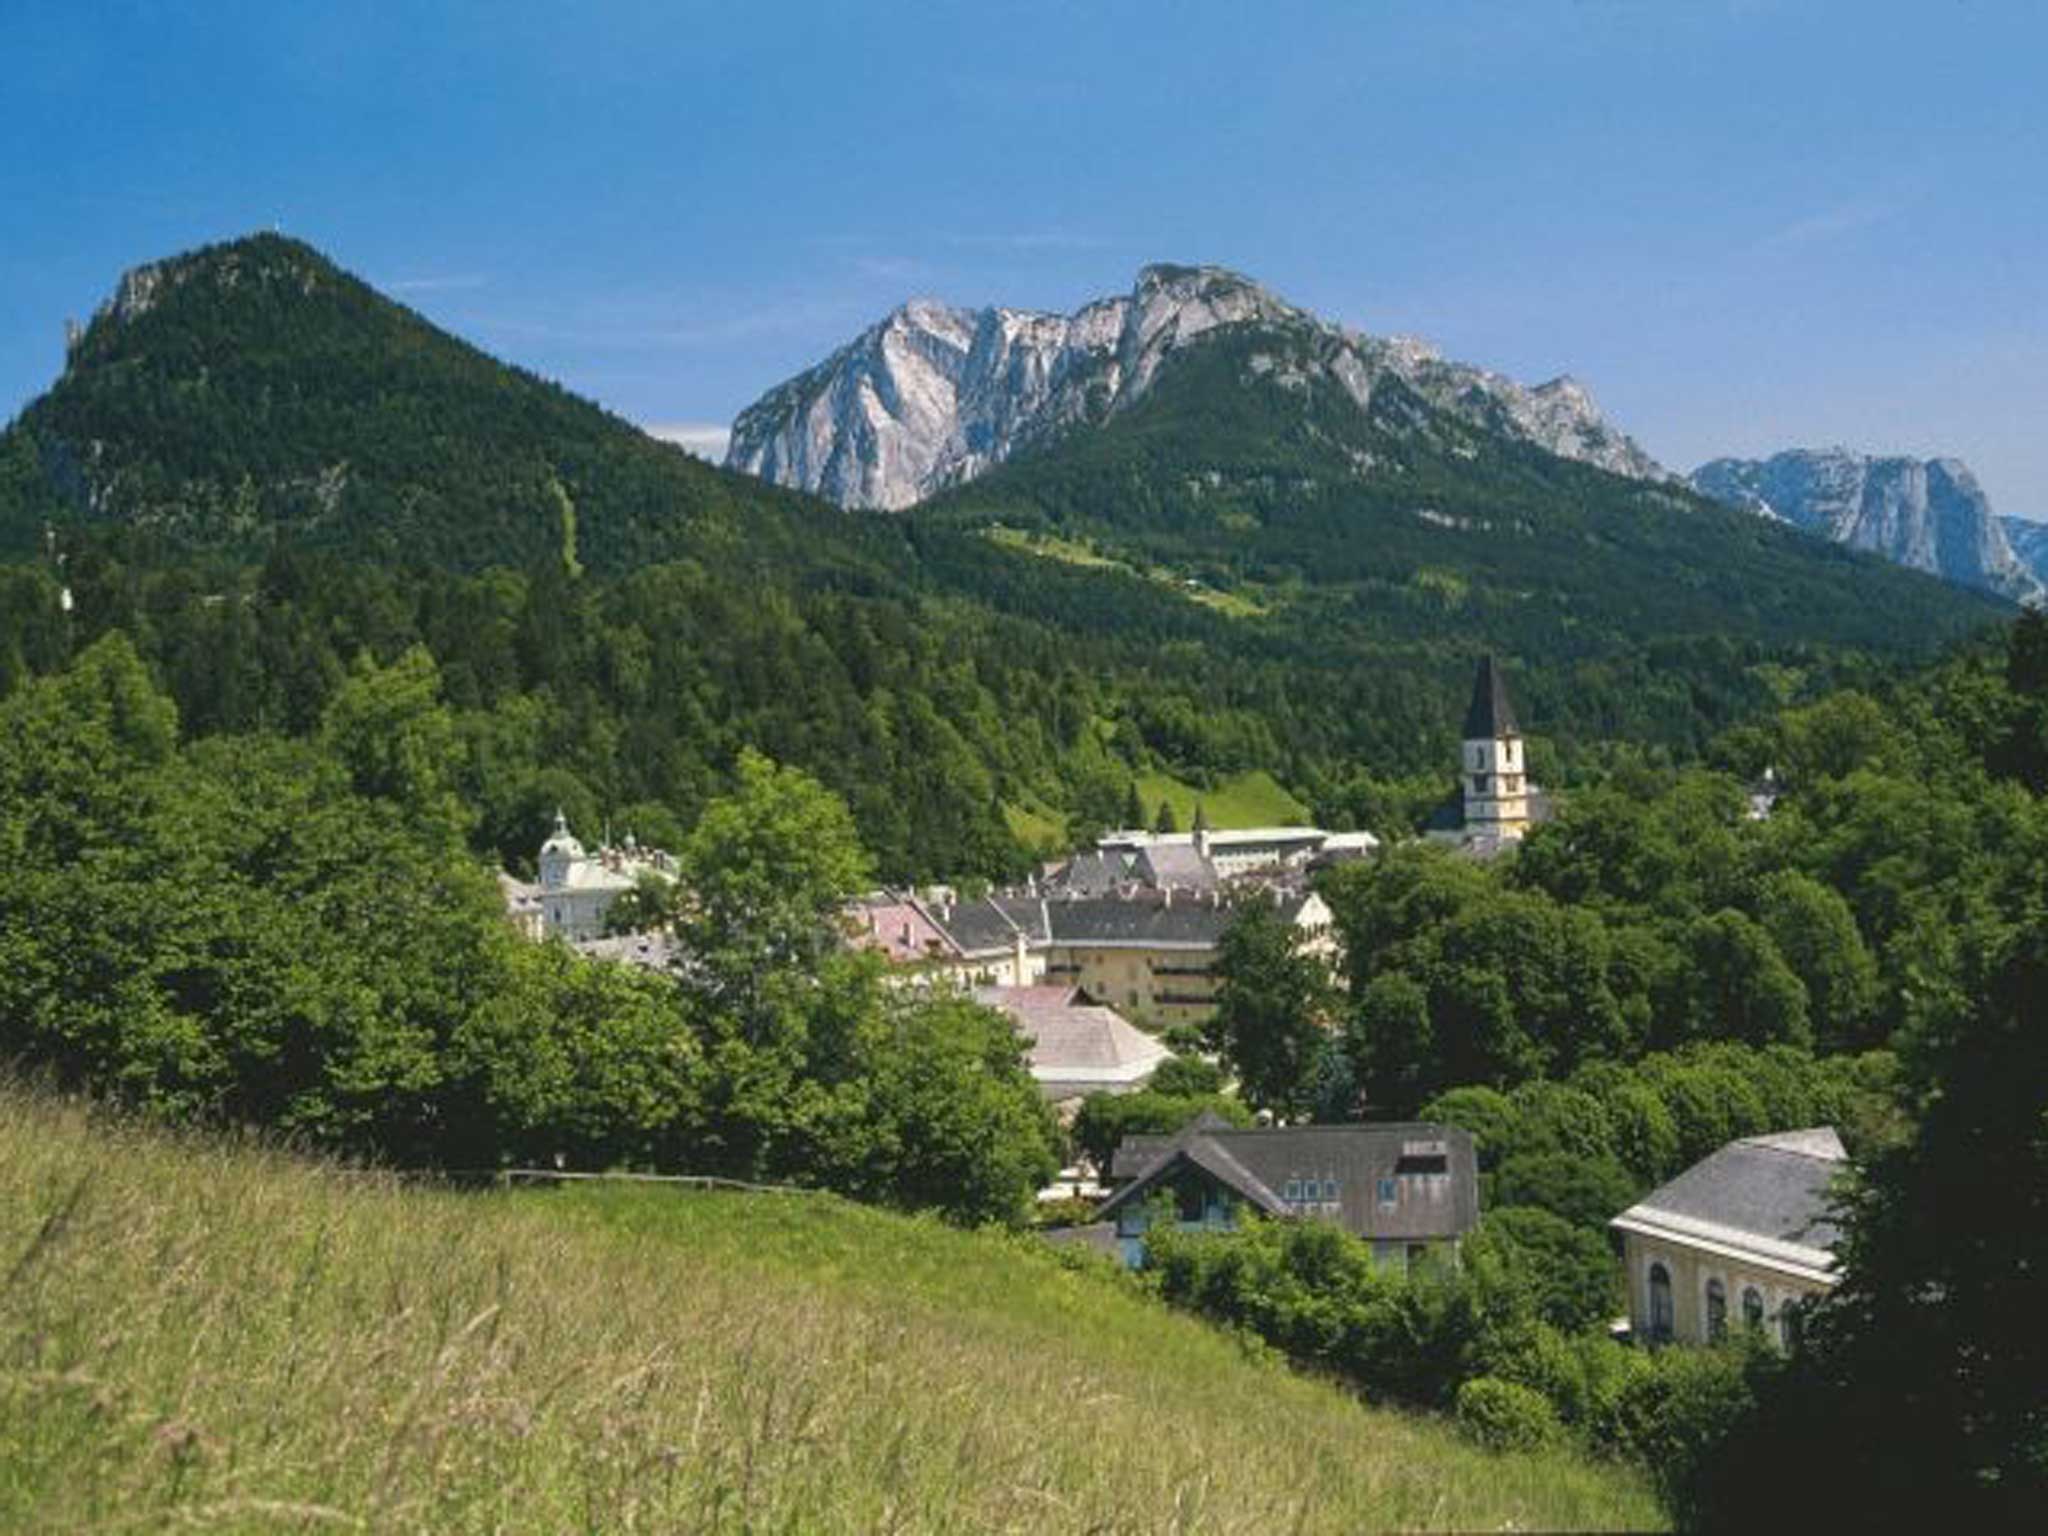 The Nazis hid 6,000 artworks in Bad Ausee